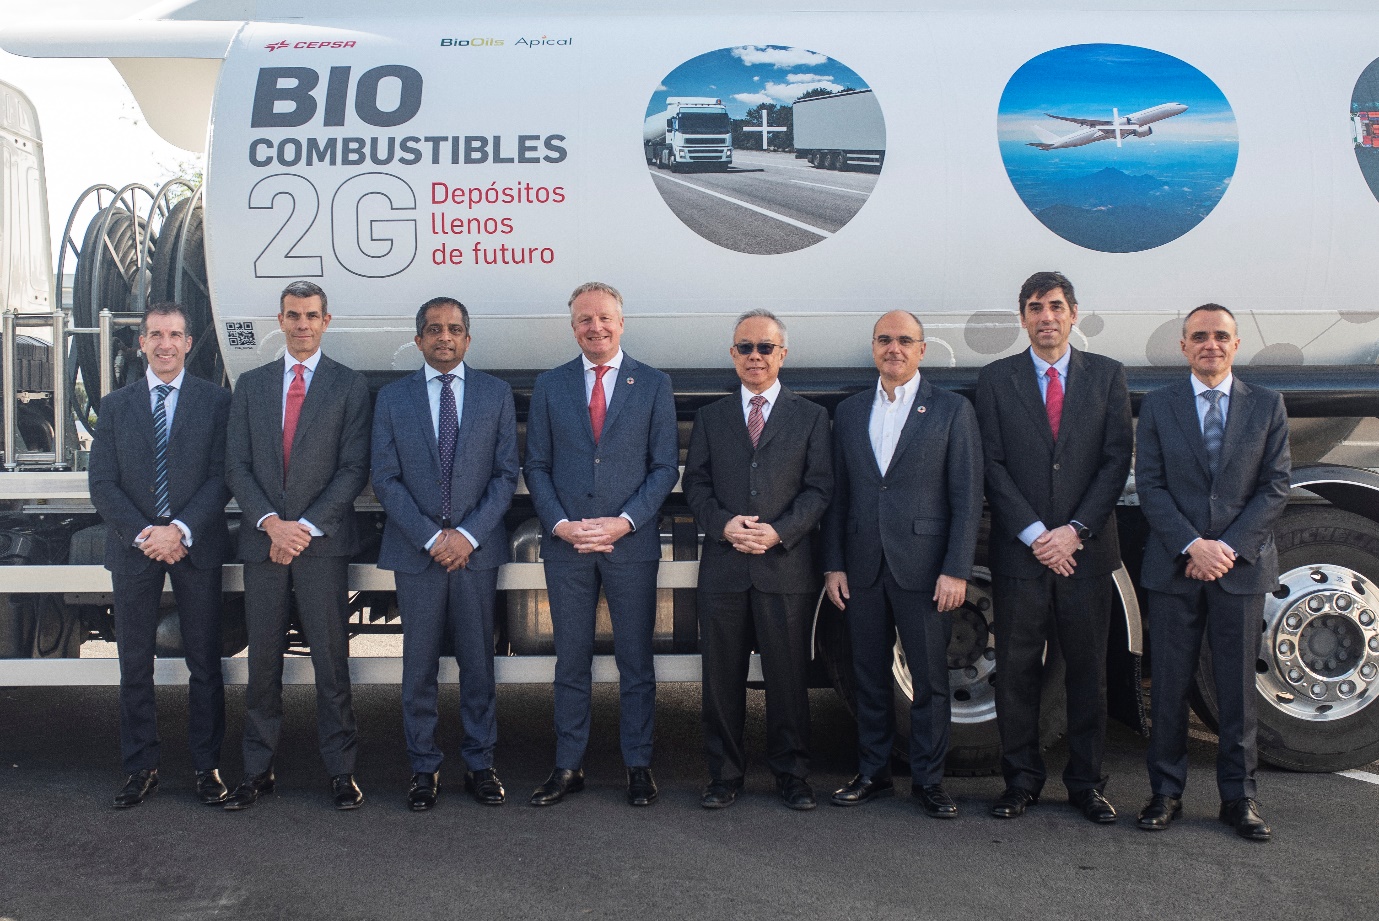 Photo caption: The new joint venture was announced at La Rábida Energy Park with the participation of Juan Manuel Moreno Bonilla, President of the Regional Government of Andalusia; Maarten Wetselaar, Cepsa CEO (fourth from the left); Oscar Garcia, Bio-Oils CEO (second from the right); Dato